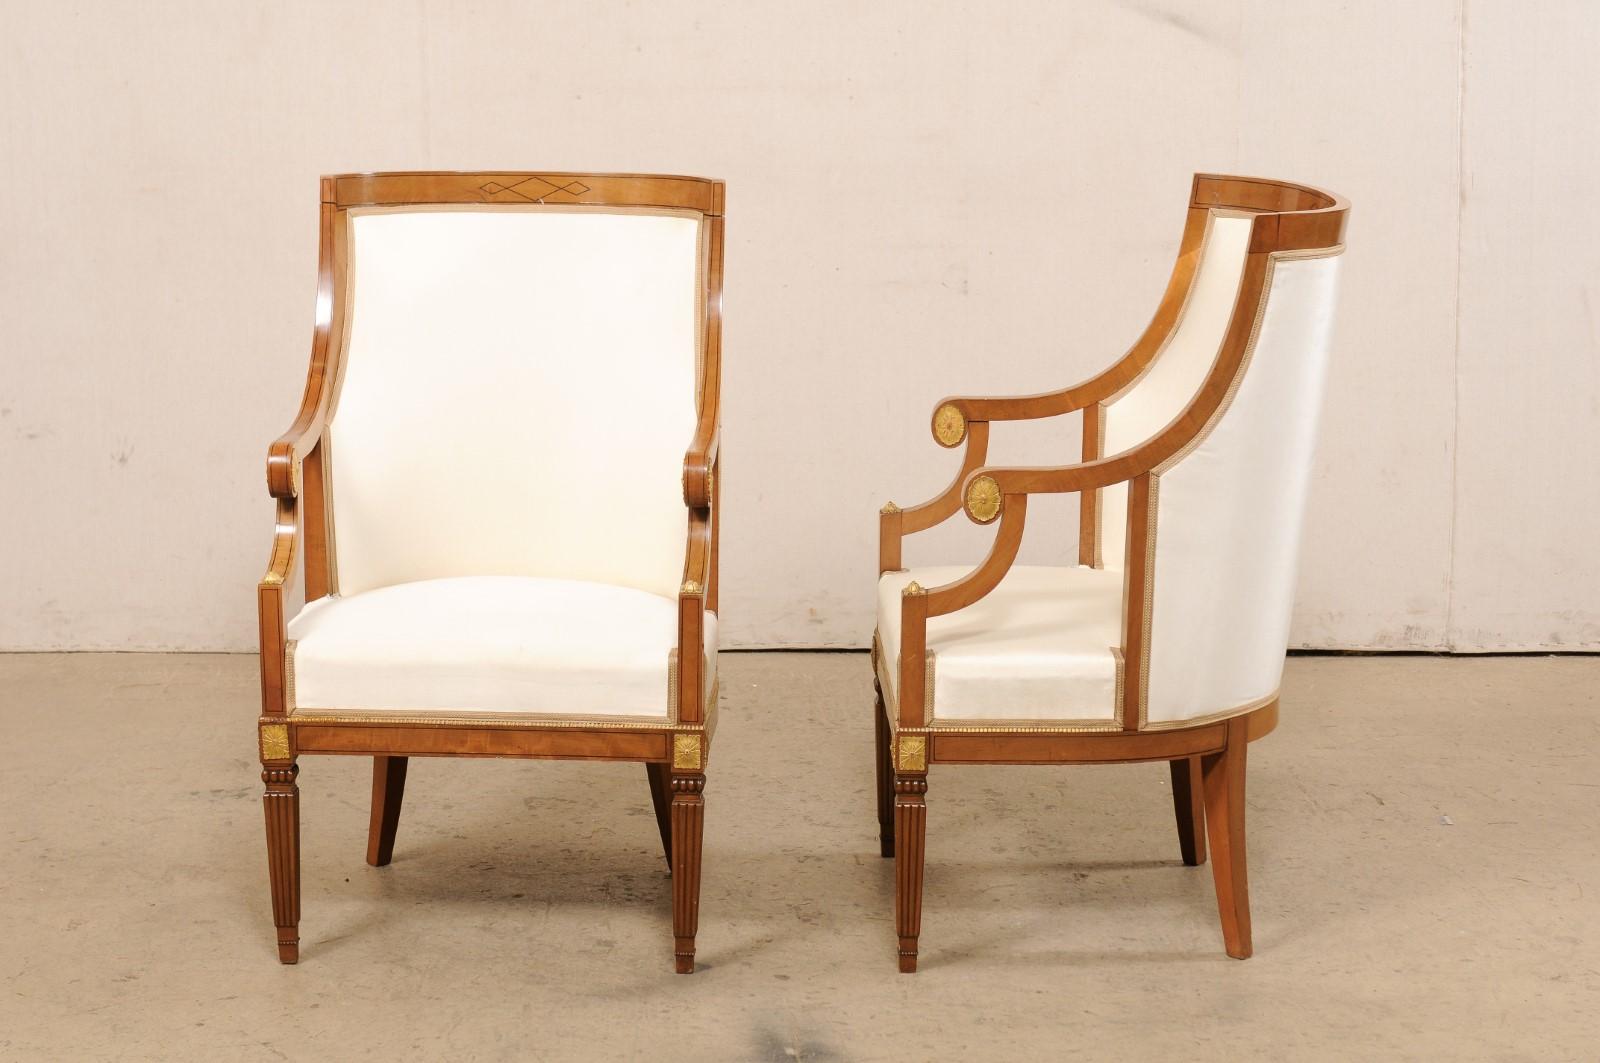 Italian Pair of Barrel-Back Carved-Wood & Upholstered Armchairs Mid-20th Century For Sale 6